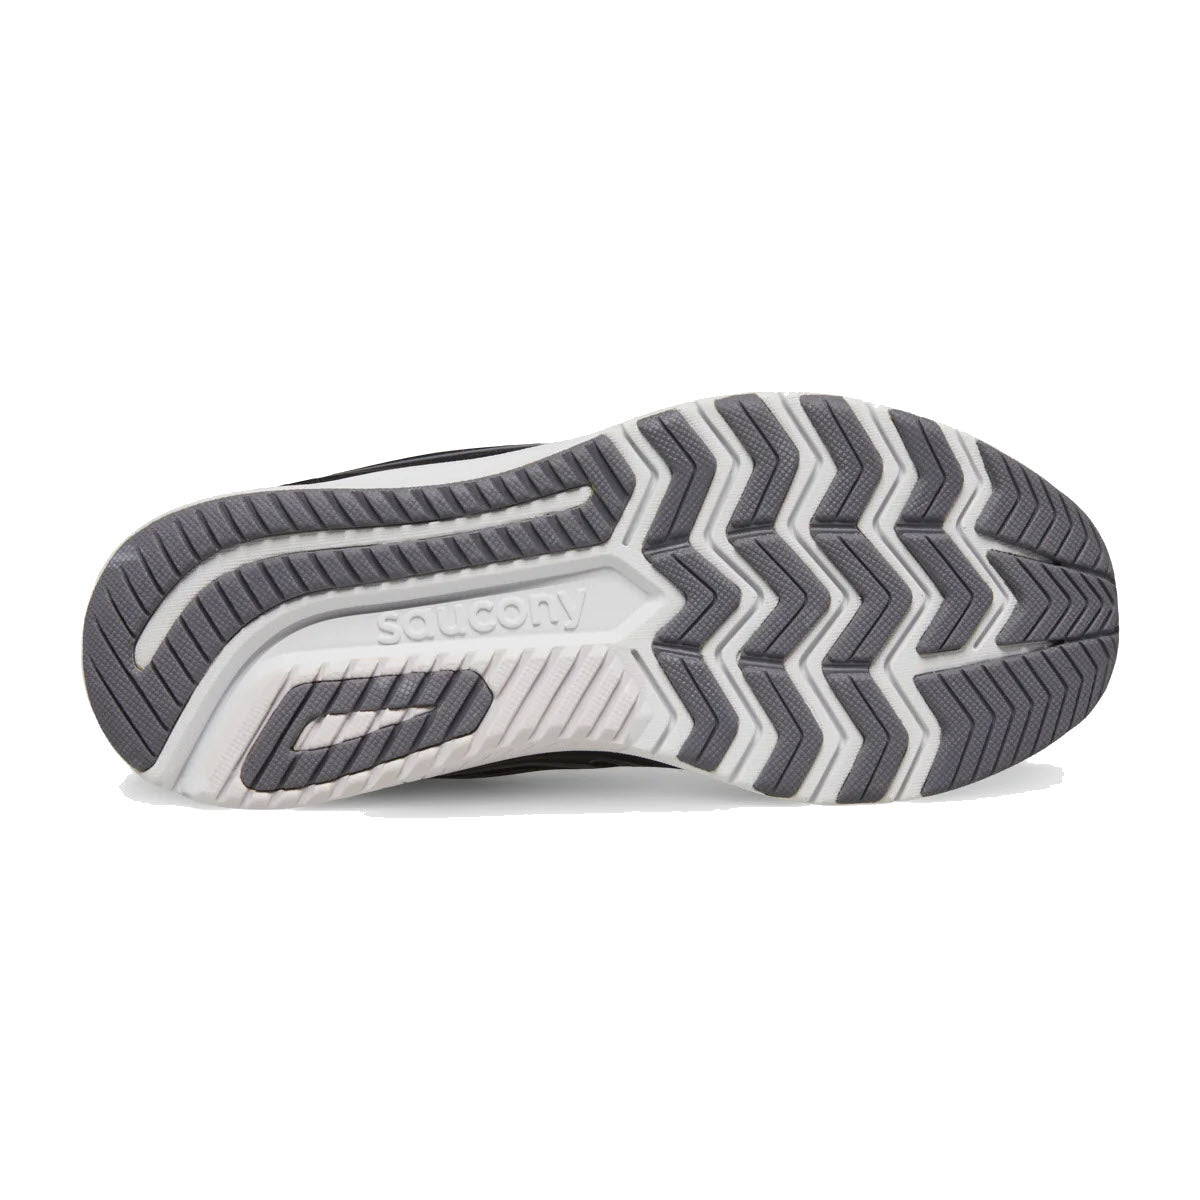 Bottom view of a Saucony Guide 16 Black/White shoe showcasing its gray and white zigzag tread pattern with the brand name visible, tailored as a kid&#39;s road sneaker.